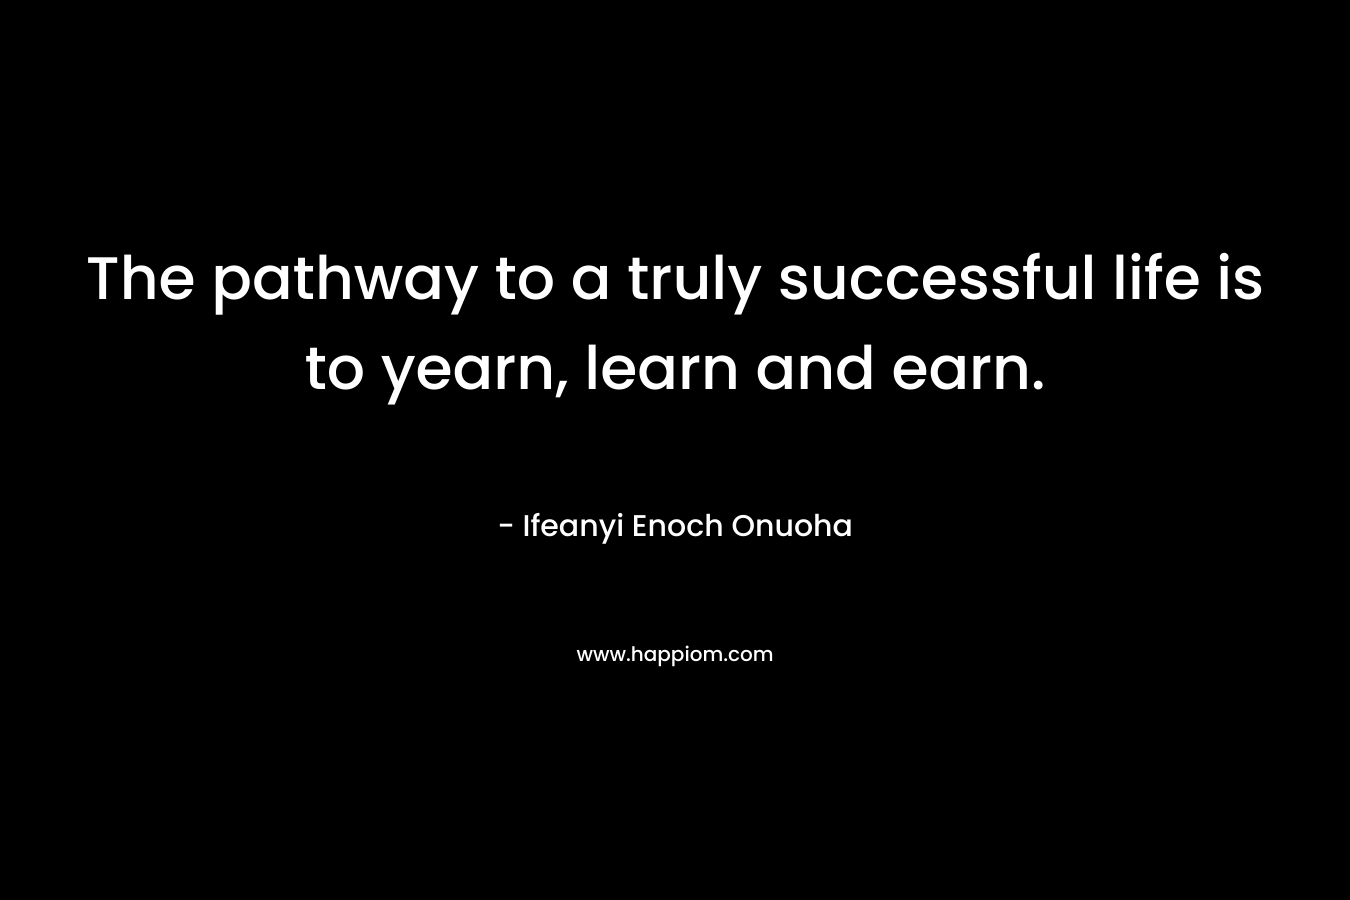 The pathway to a truly successful life is to yearn, learn and earn. – Ifeanyi Enoch Onuoha